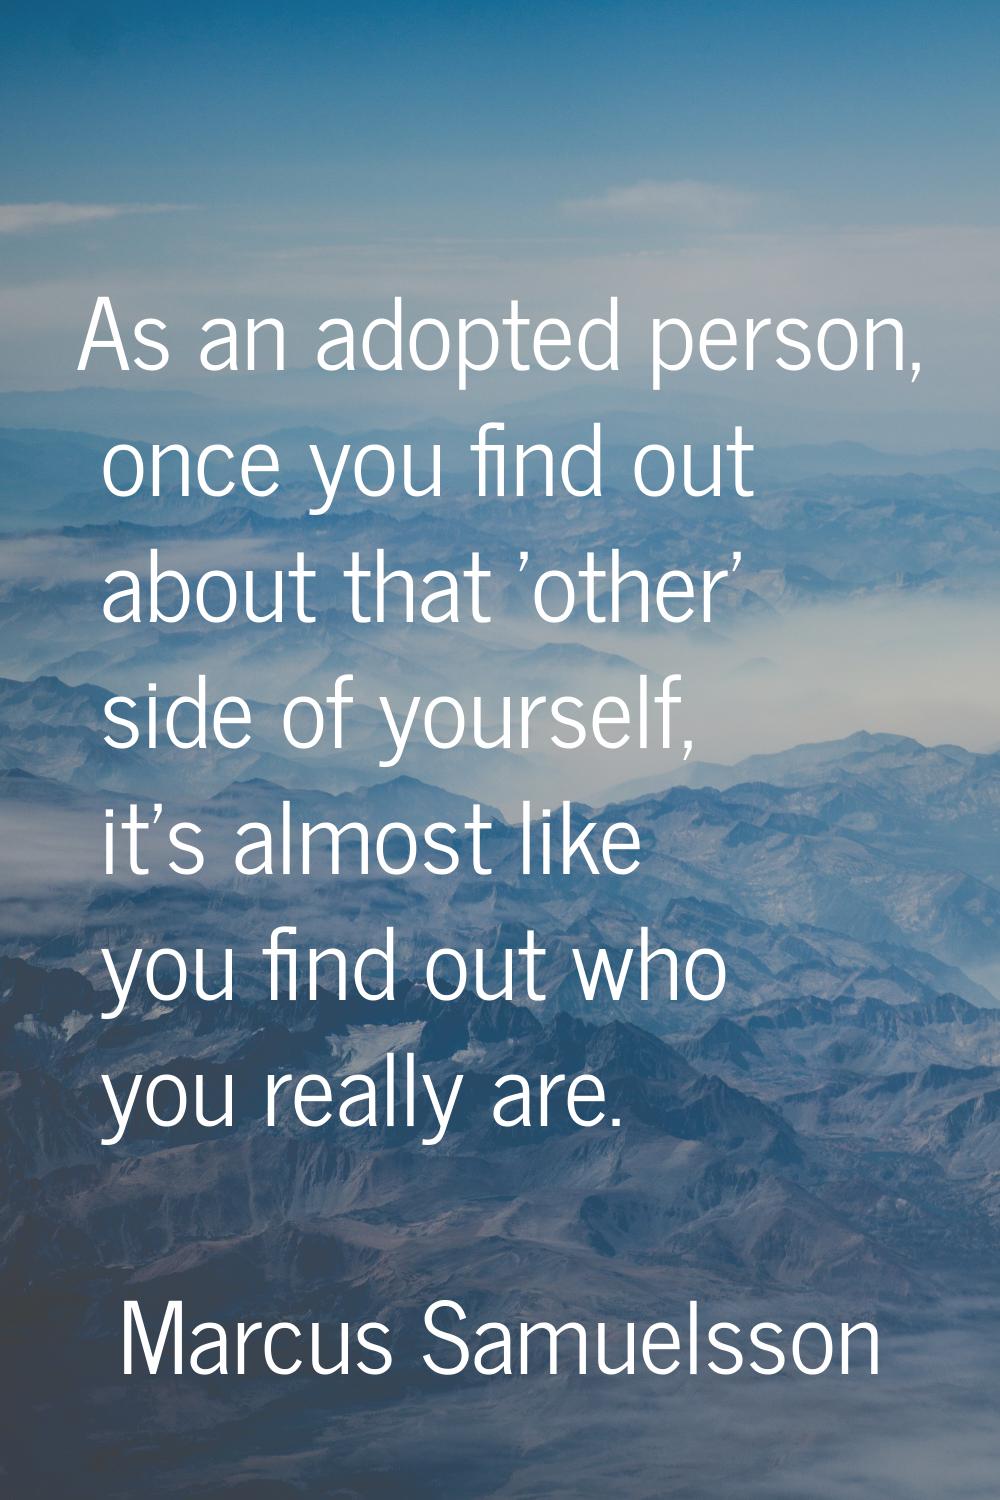 As an adopted person, once you find out about that 'other' side of yourself, it's almost like you f